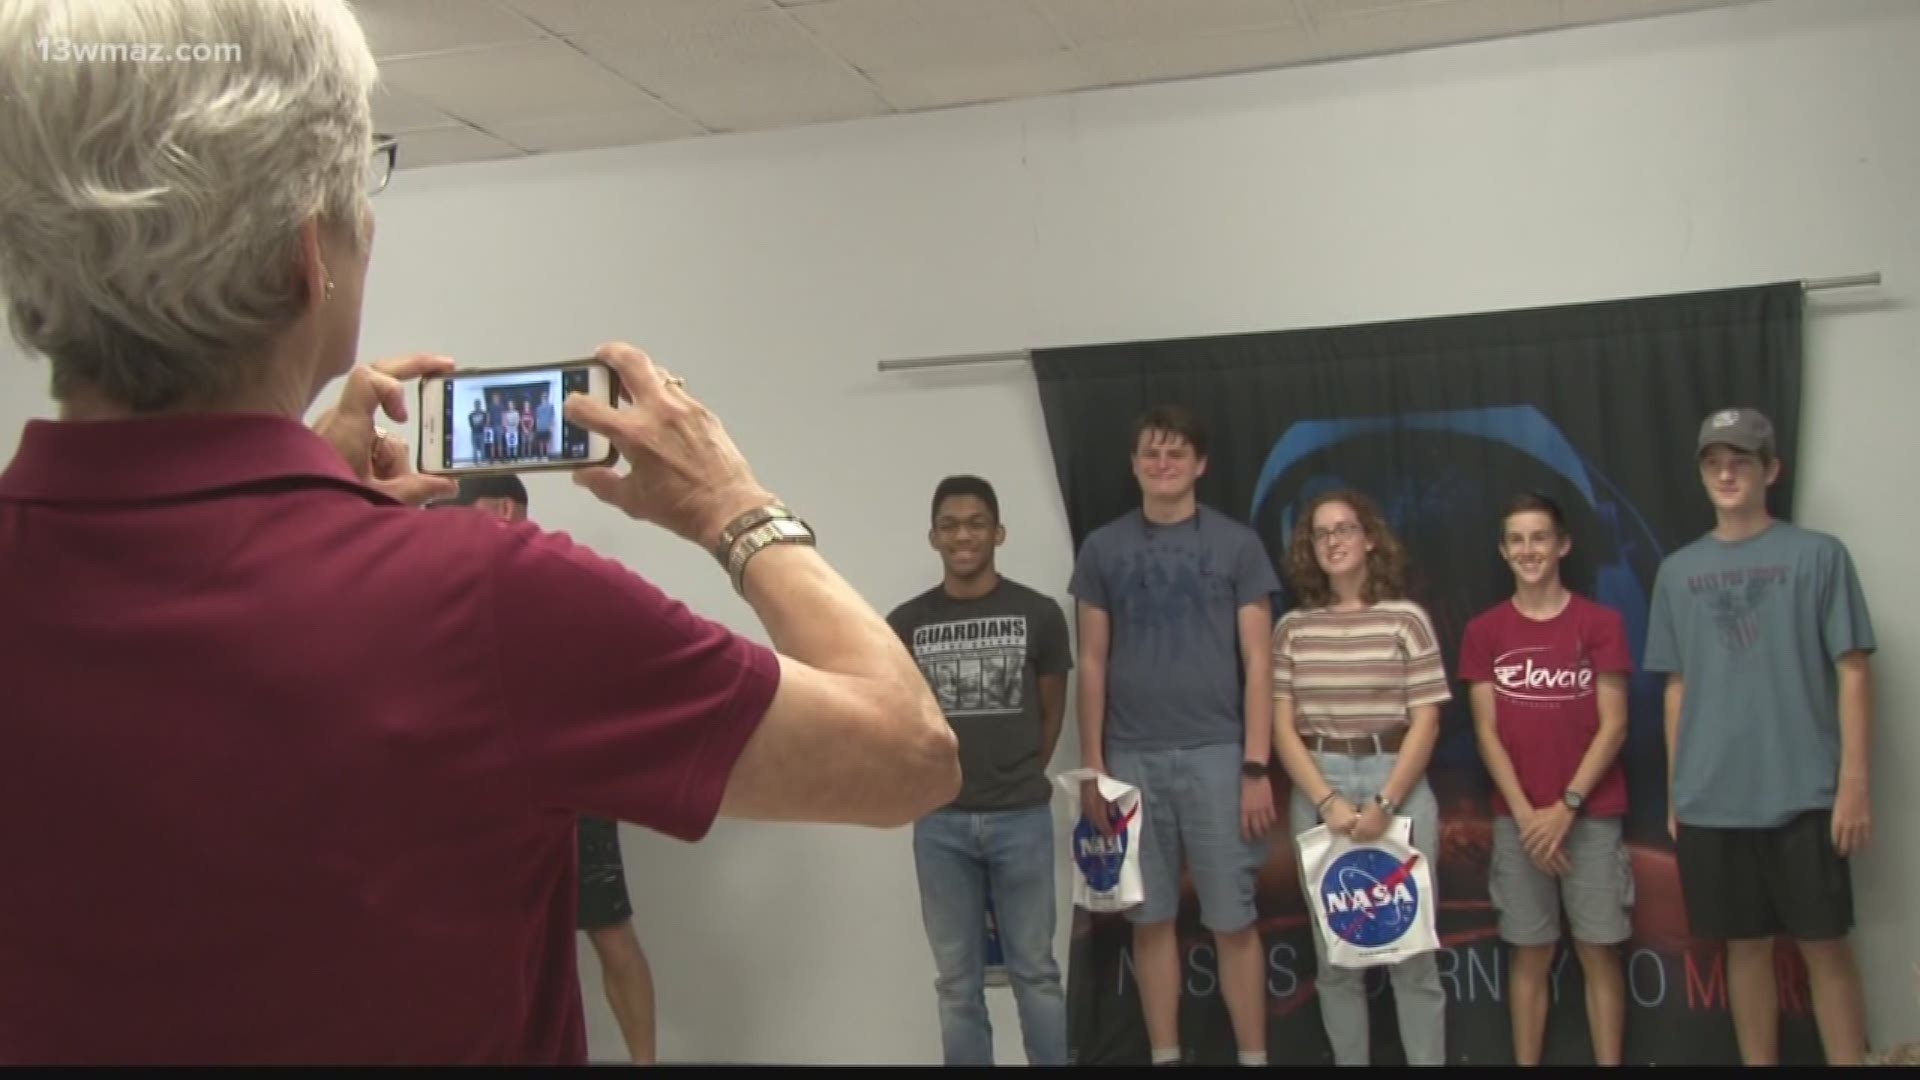 July 20 marks the anniversary of the Apollo 11 moon landing, and in theme with the day, teenagers at the Museum of Aviation's Space and Innovation Center took their own trip to space at the Museum of Aviation.